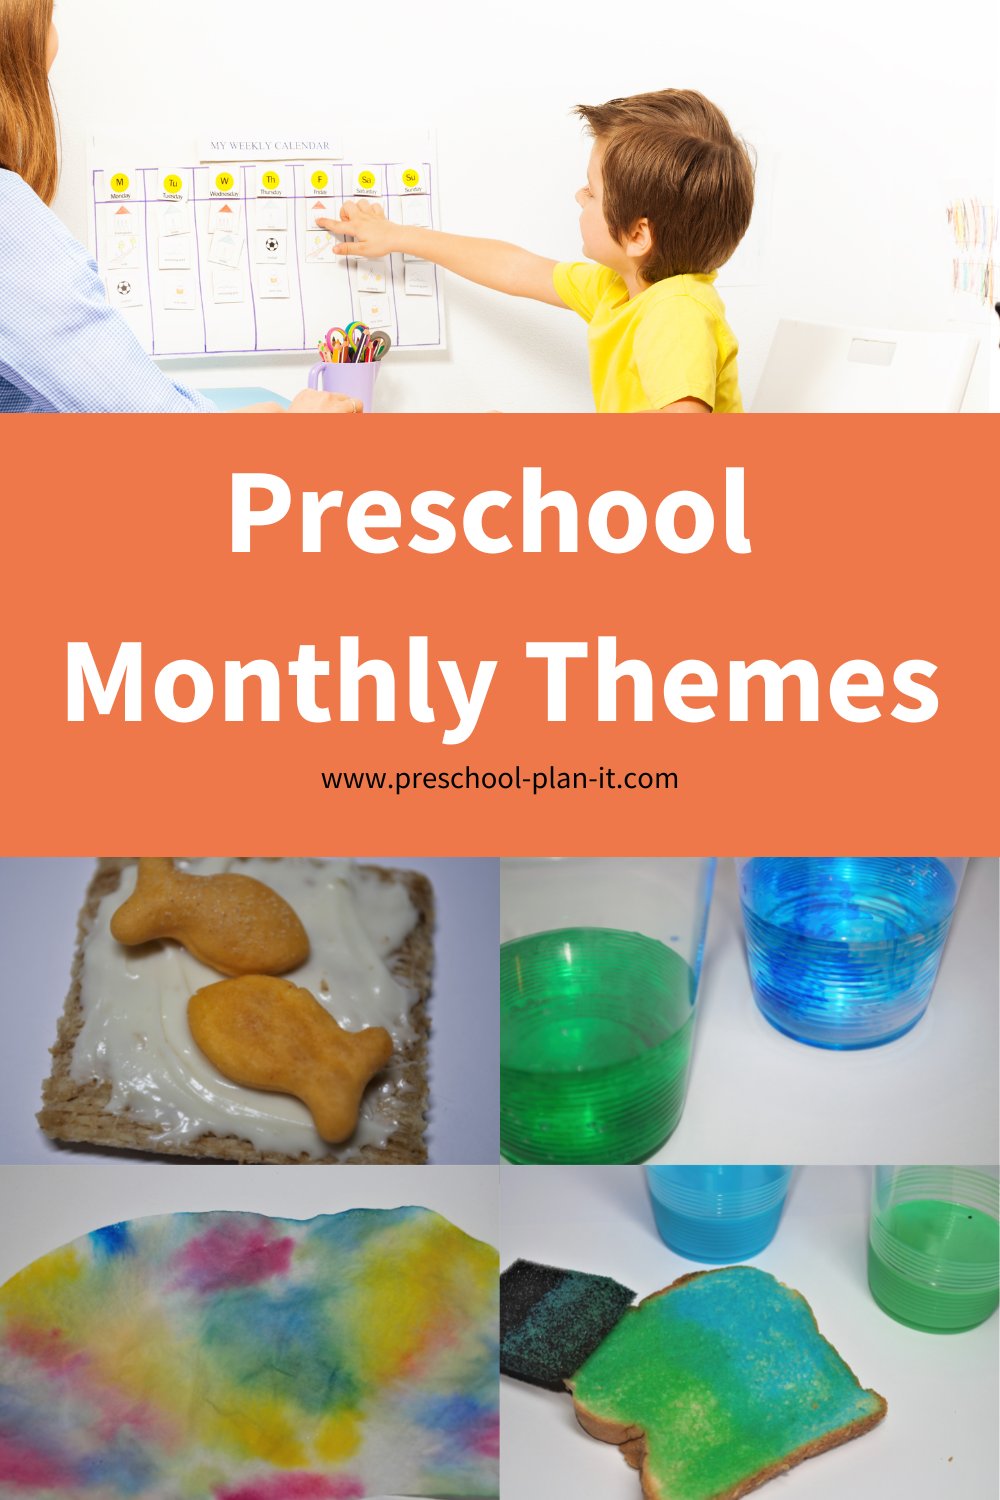 Images for each month for preschool monthly themes